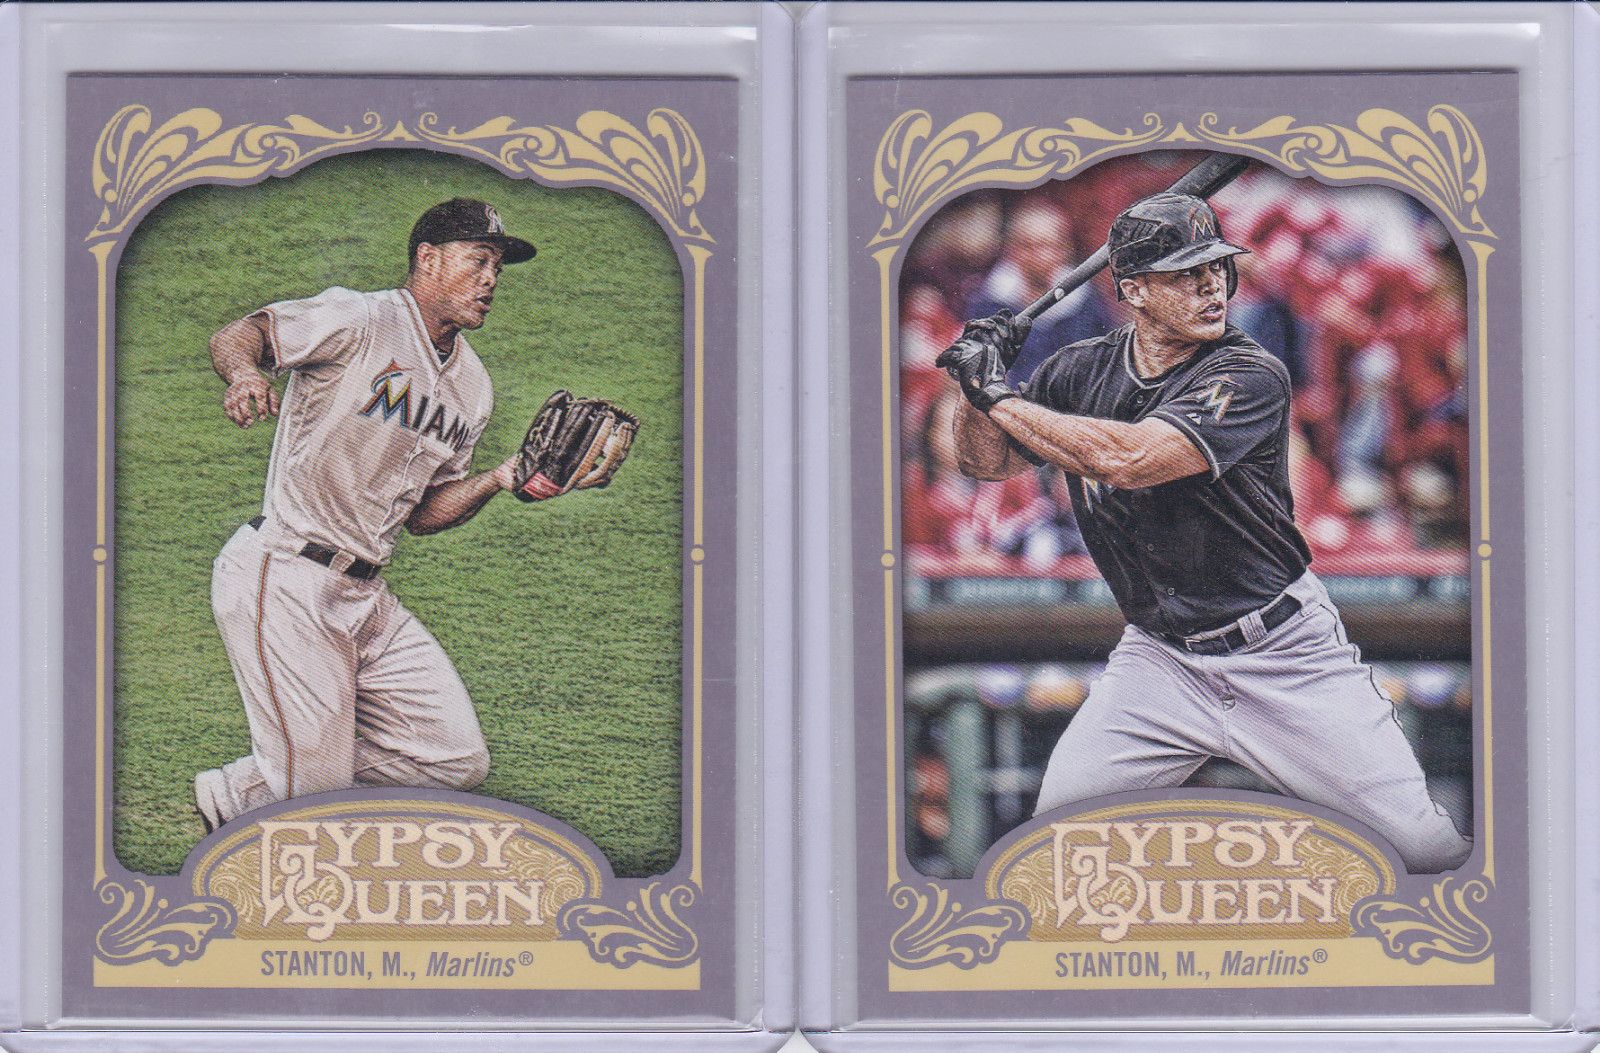 2012 Topps Gypsy Queen Mike Stanton Base